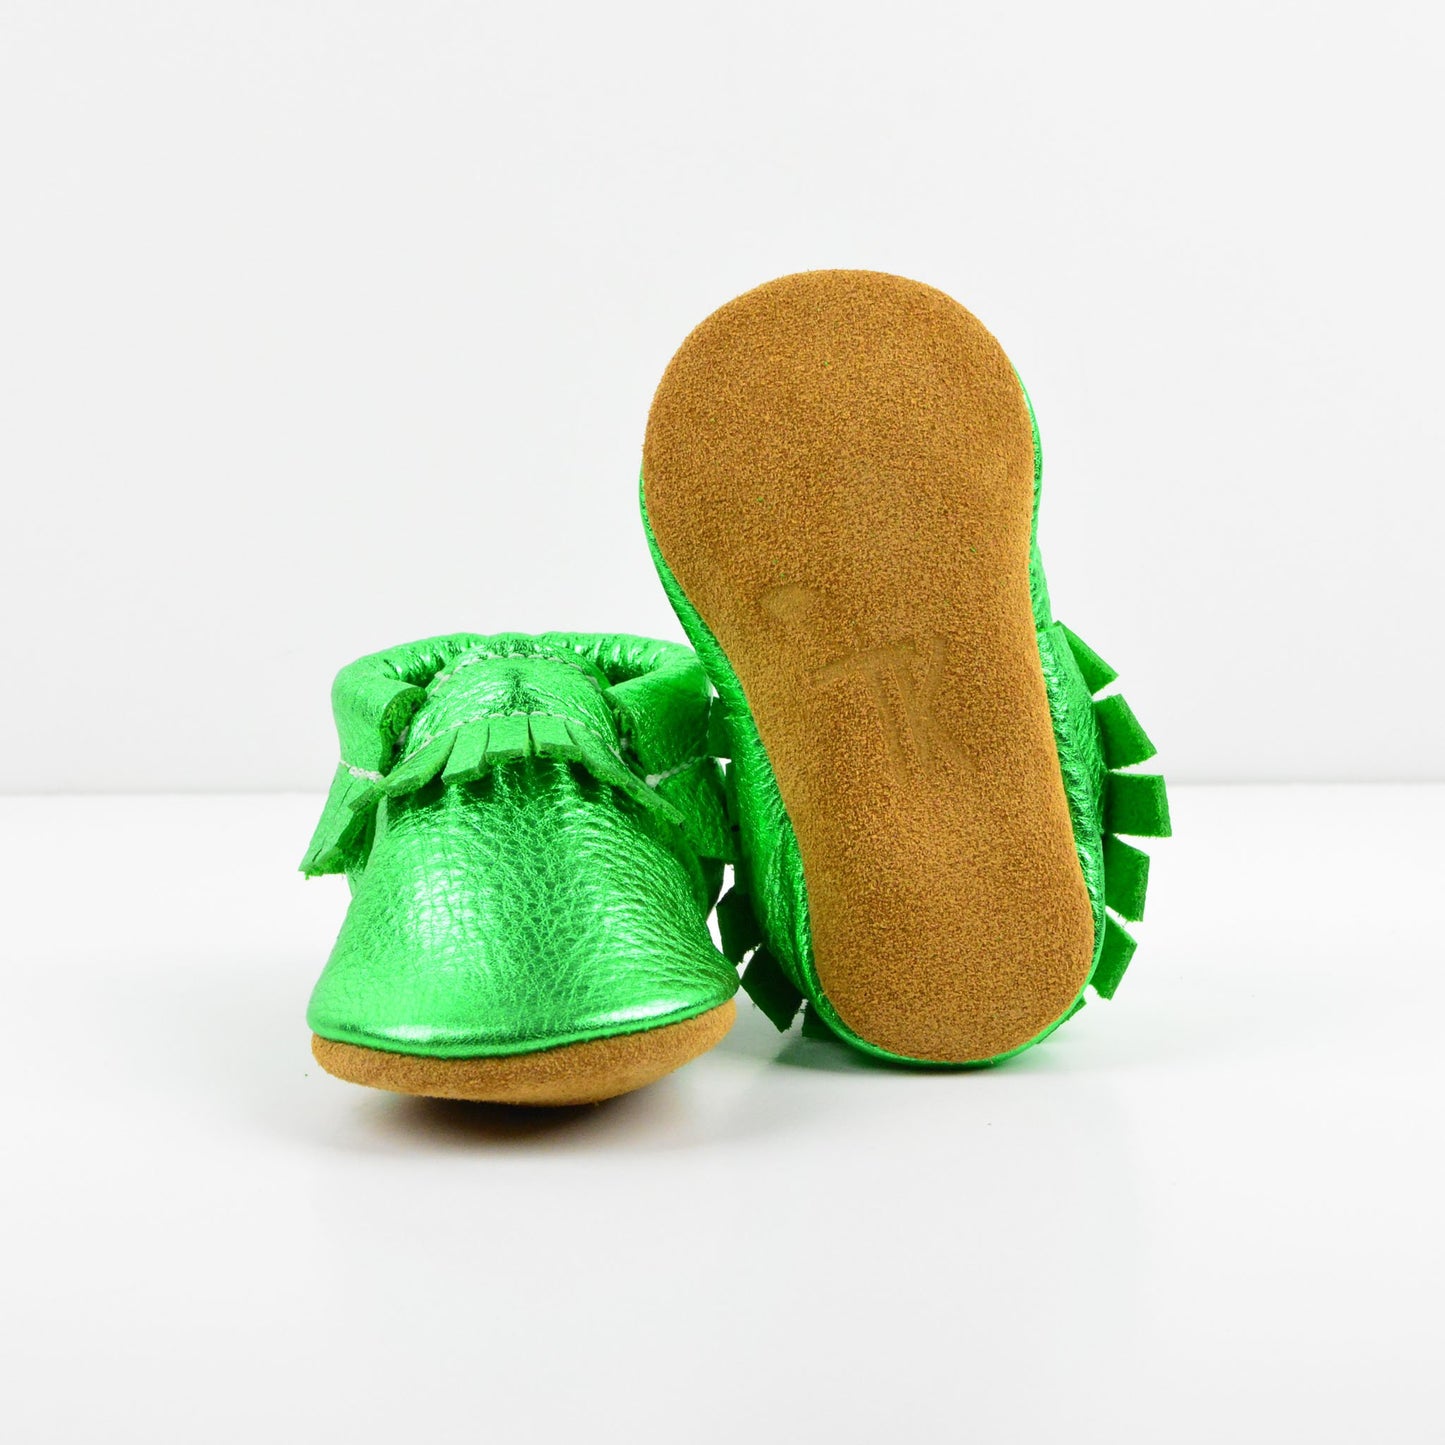 RTS Christmas Green Moccasins With Tan Suede Leather Soles - Size 3 (12-18M)(5")